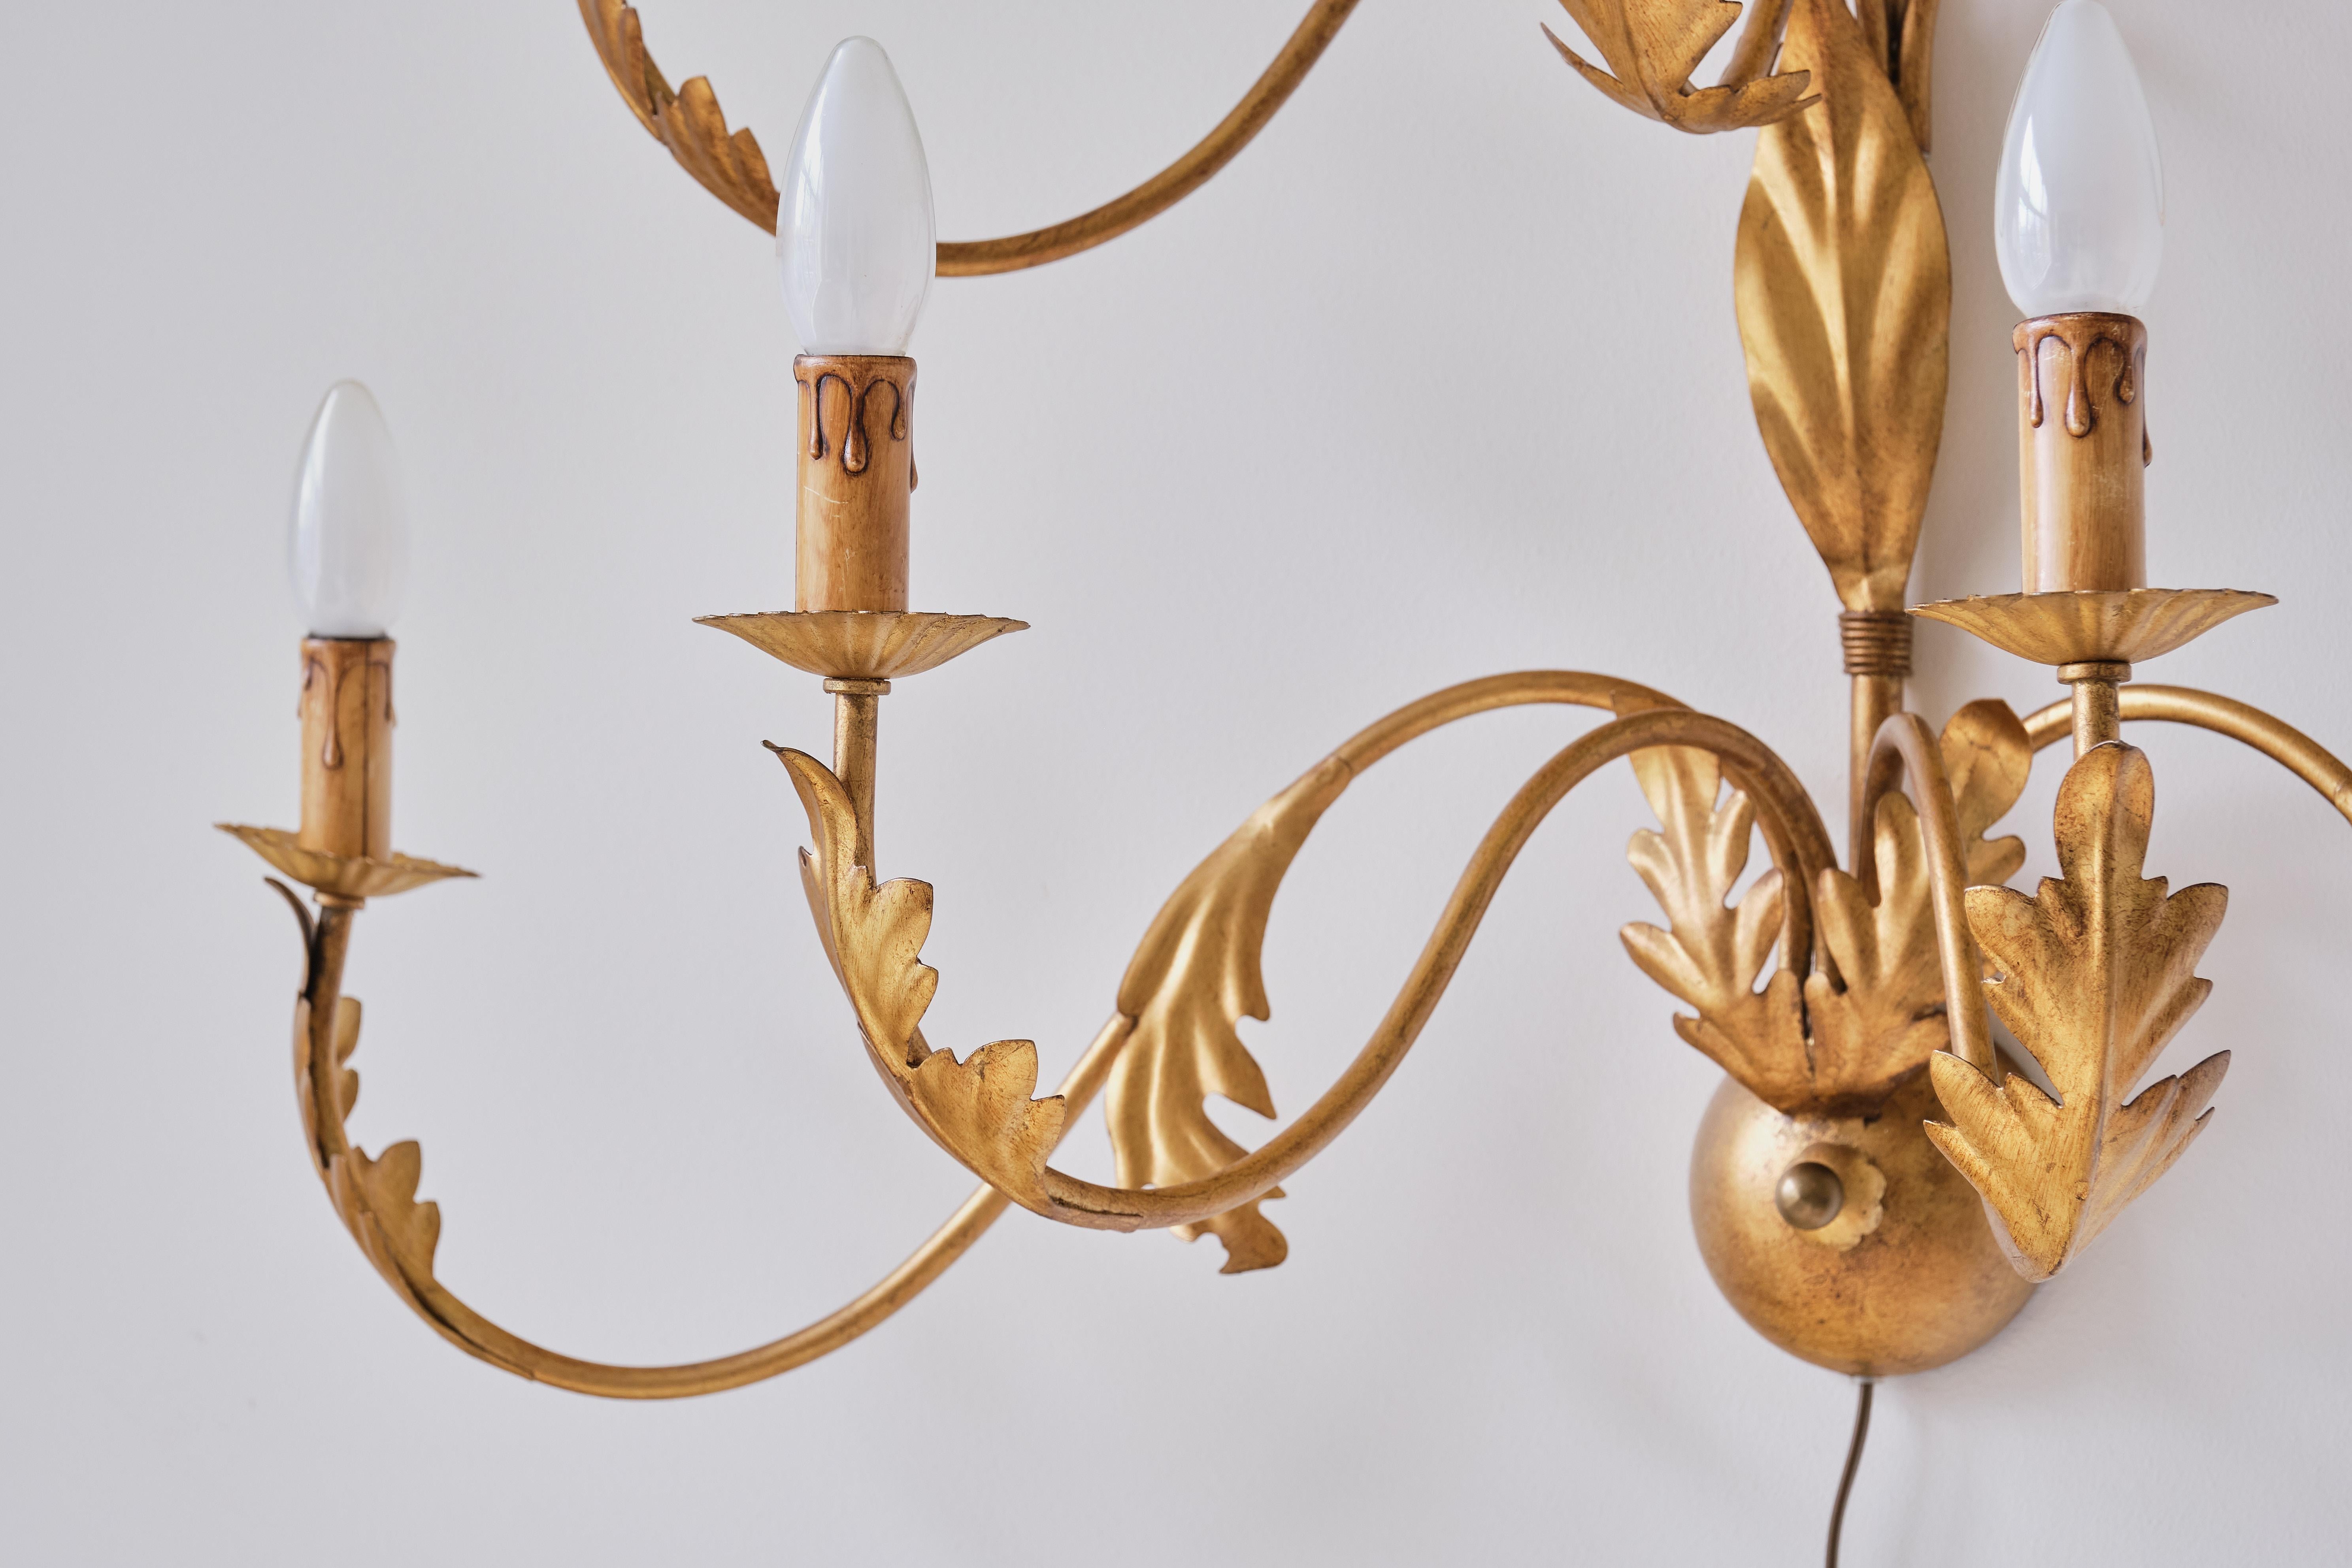 Large 10 Arm Gilded Wall Light by Banci Firenze, Italy, 1960s For Sale 3